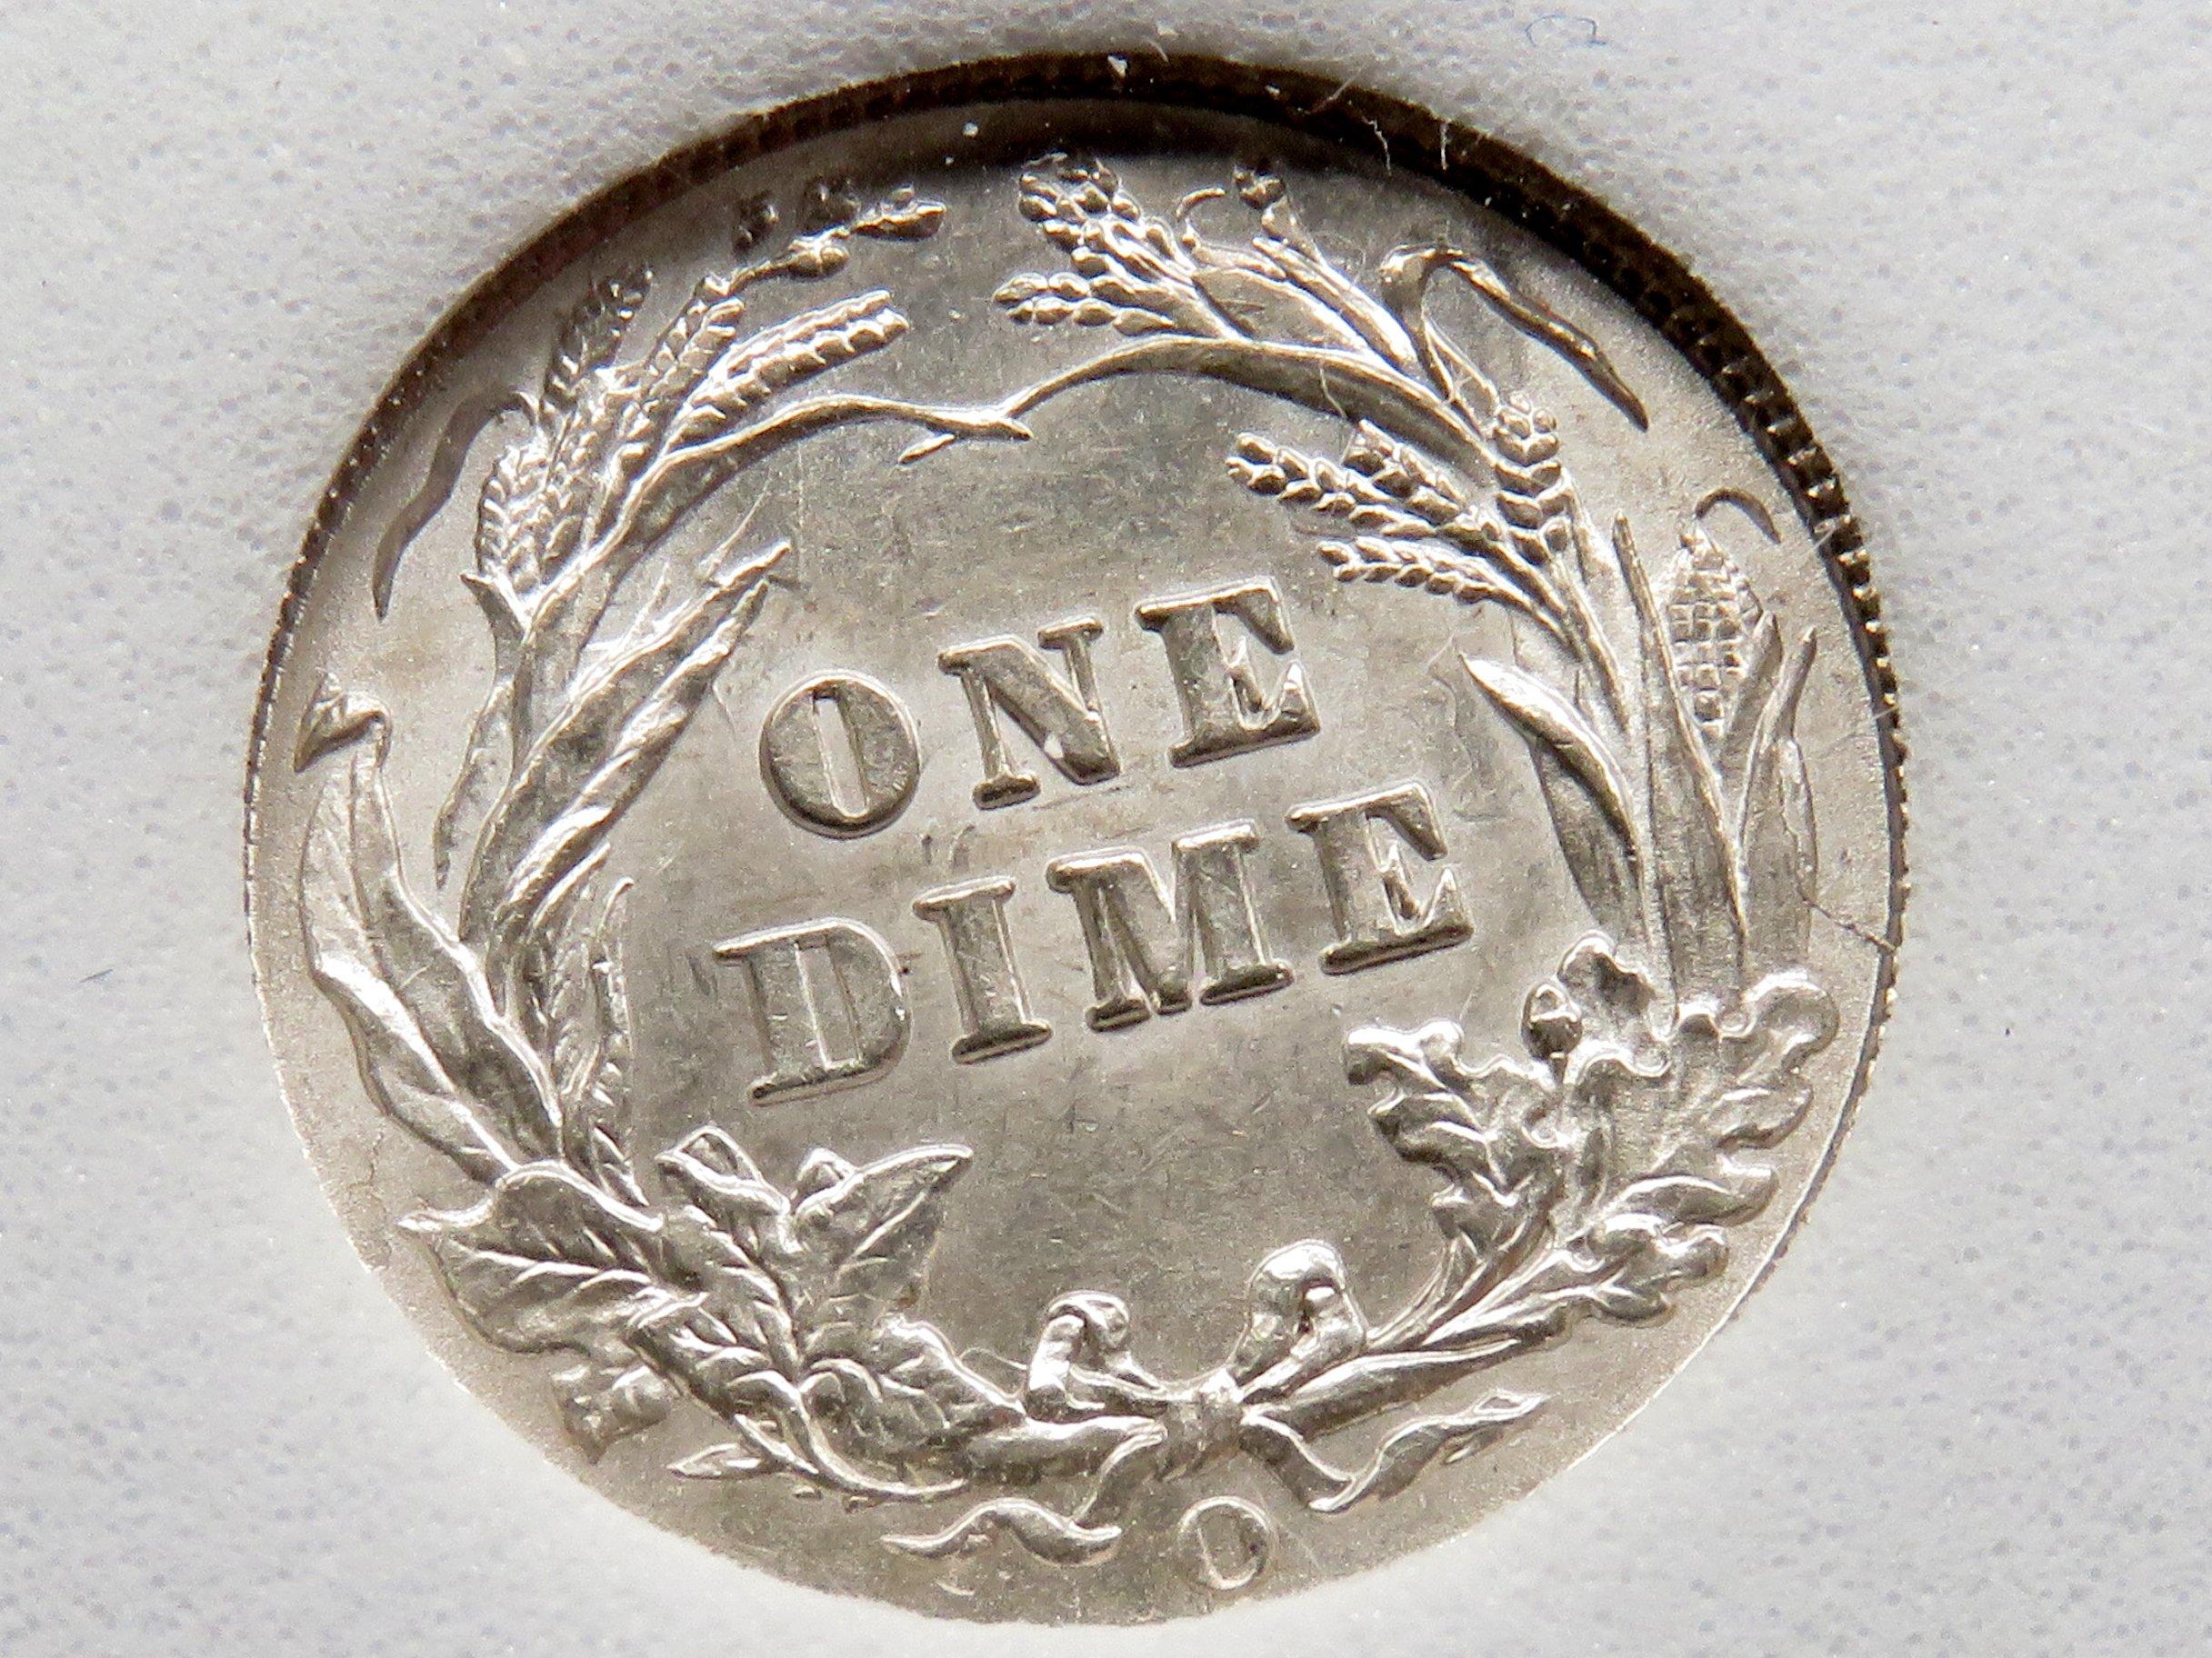 Dime Barber 1902-O (Box incorrectly says 1902) NNC Mint State (Well struck)